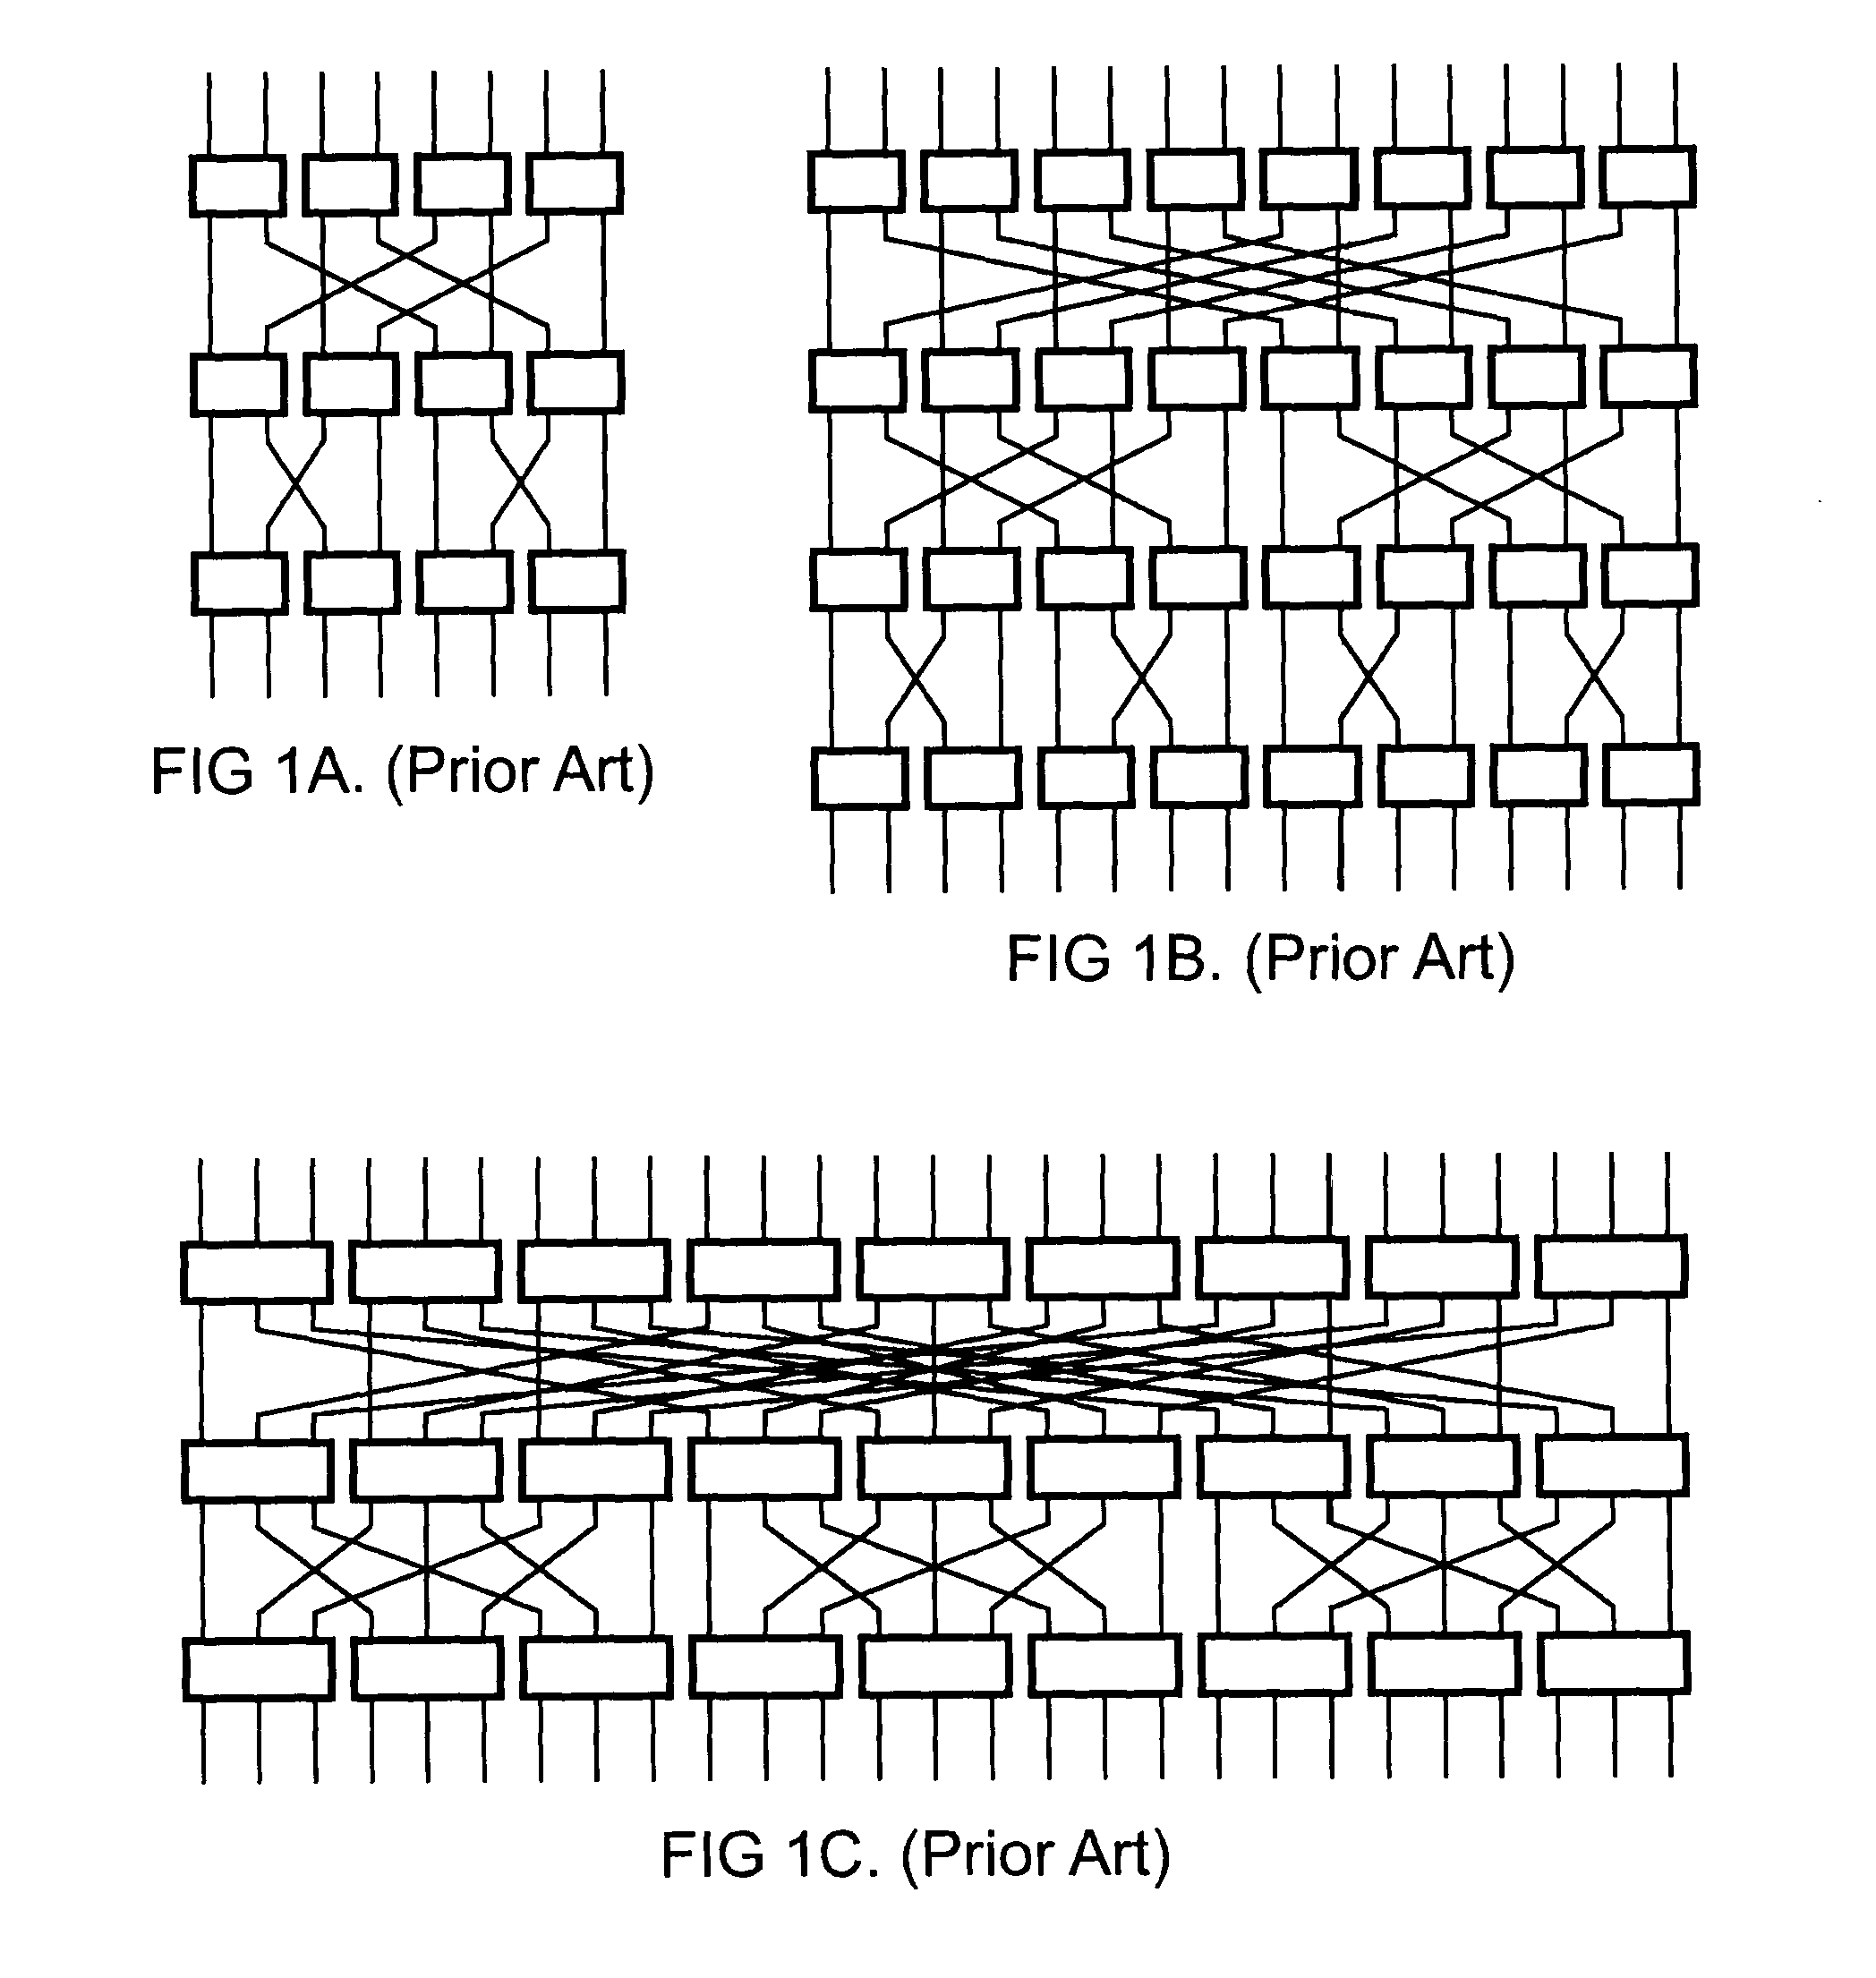 Systems and methods for overlaid switching networks